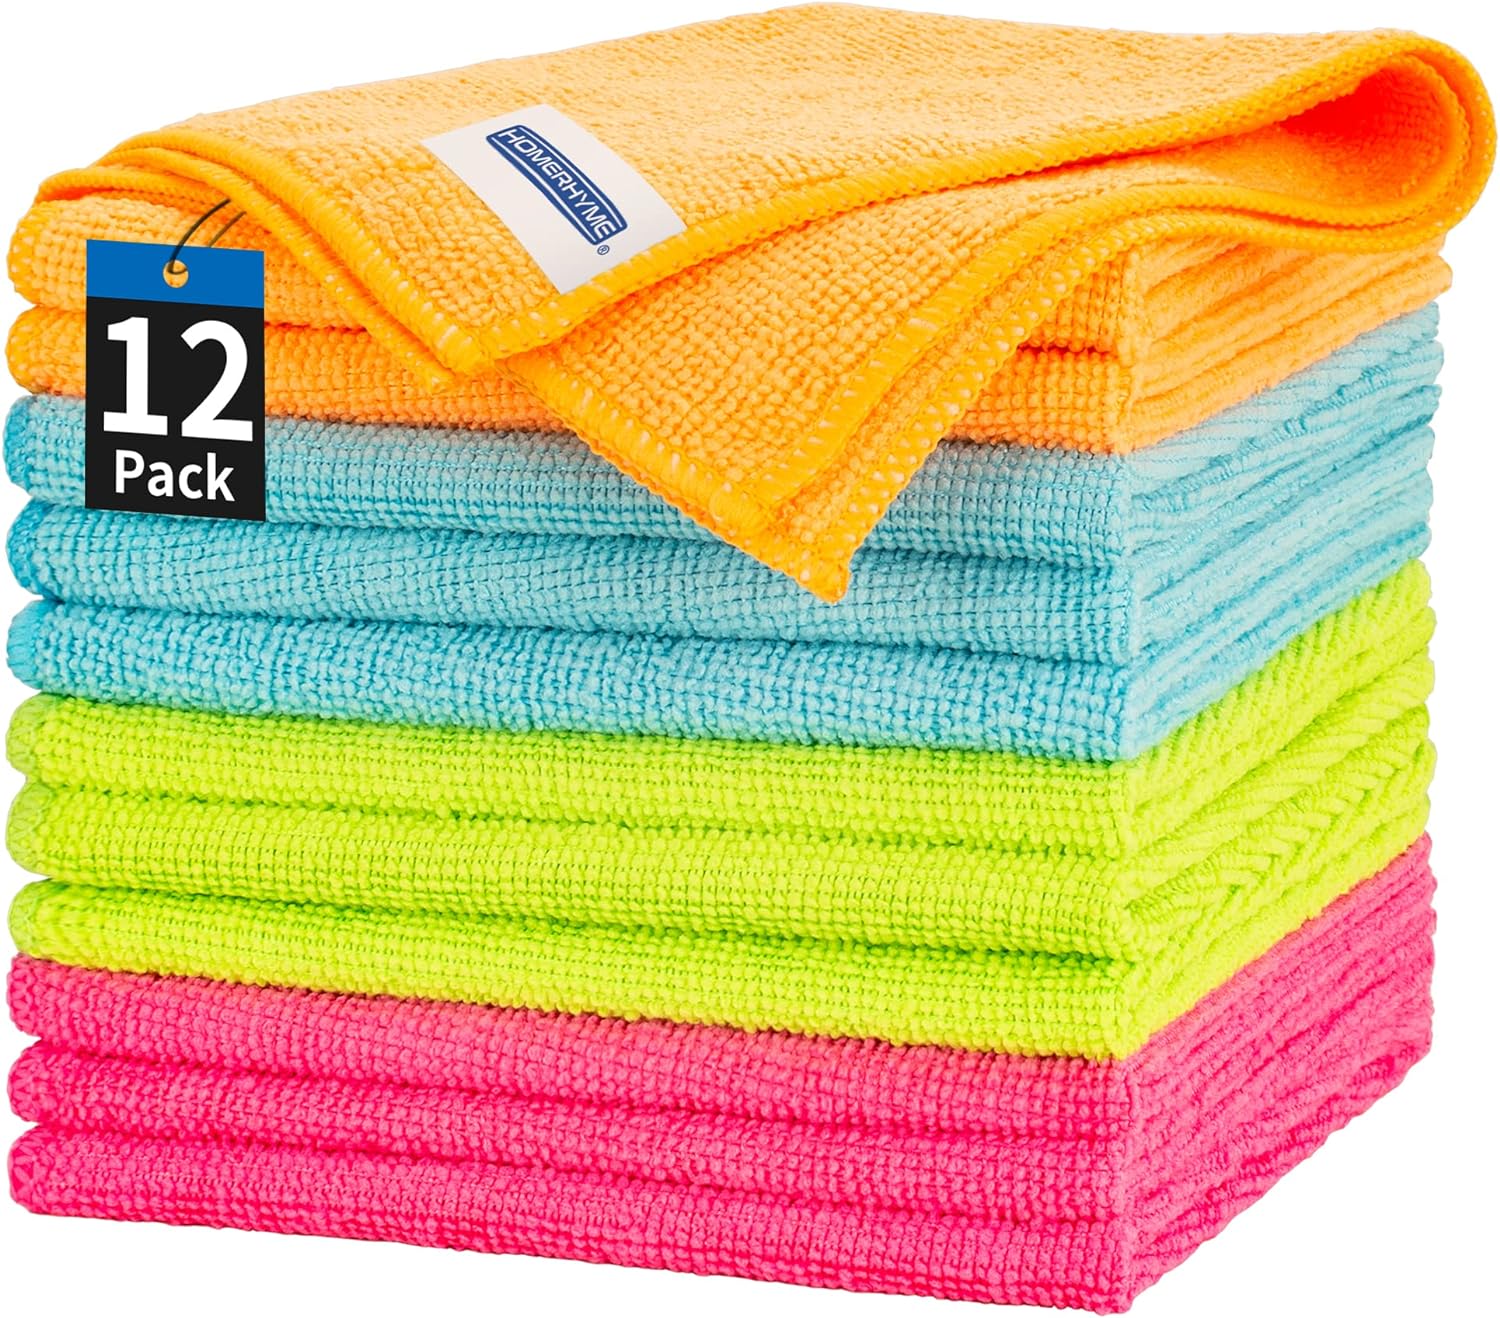 12 x 12 Microfiber Cleaning Cloths (50 Pack) - Reusable Towels